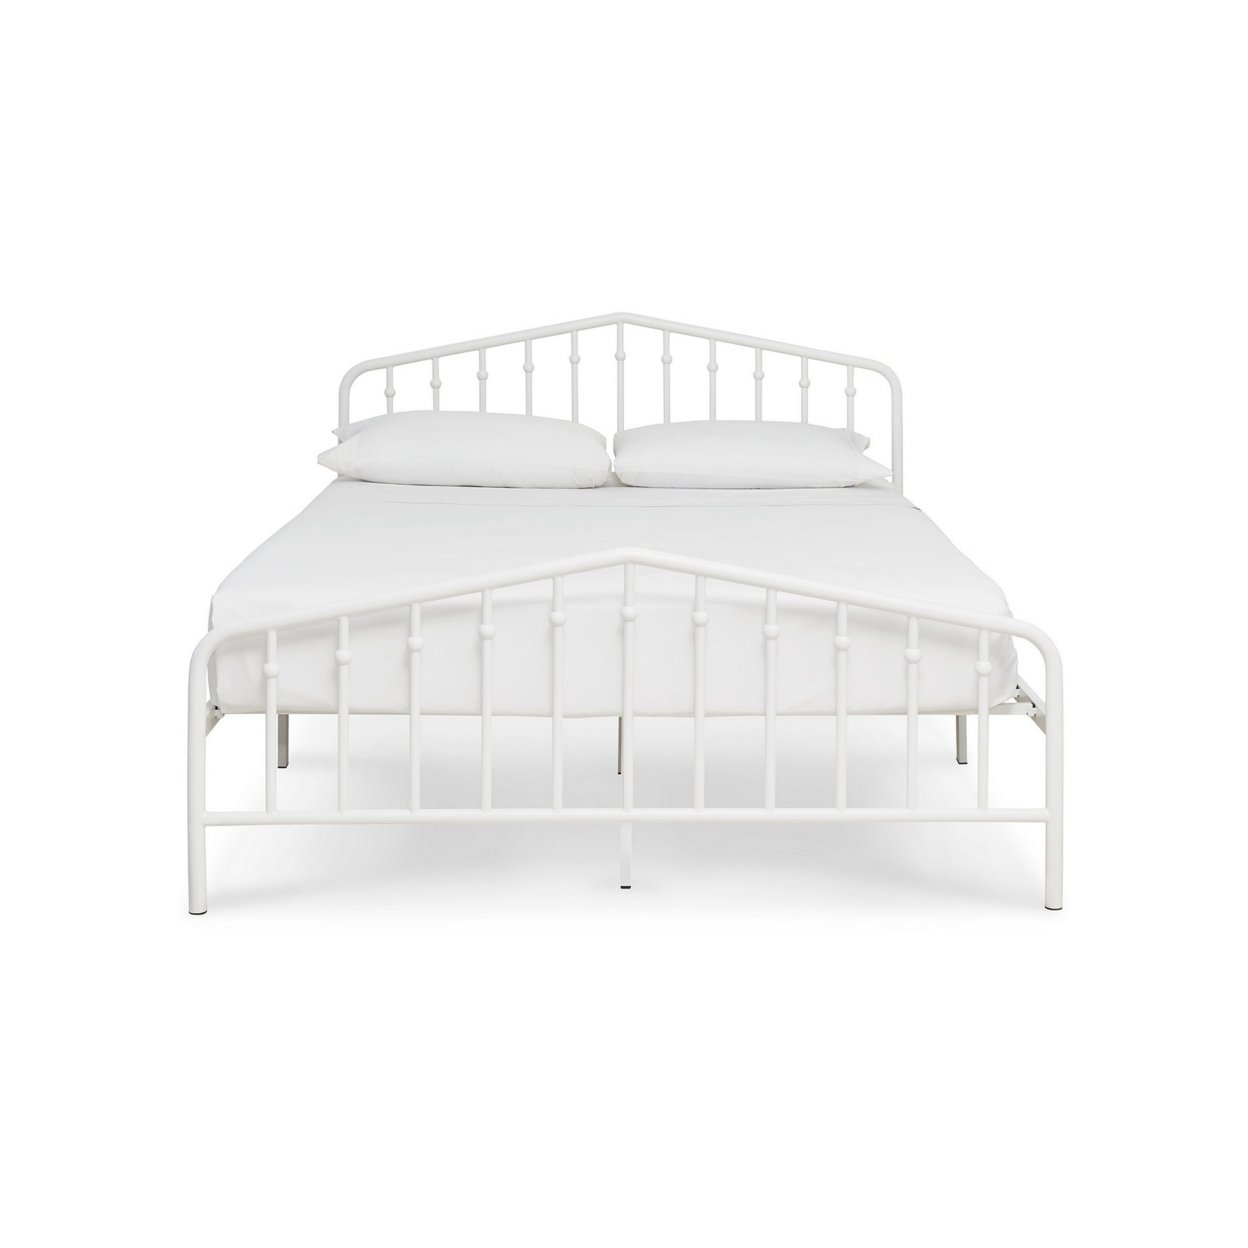 Queen Size Platform Bed, Classic Arched Headboard, White Metal Frame